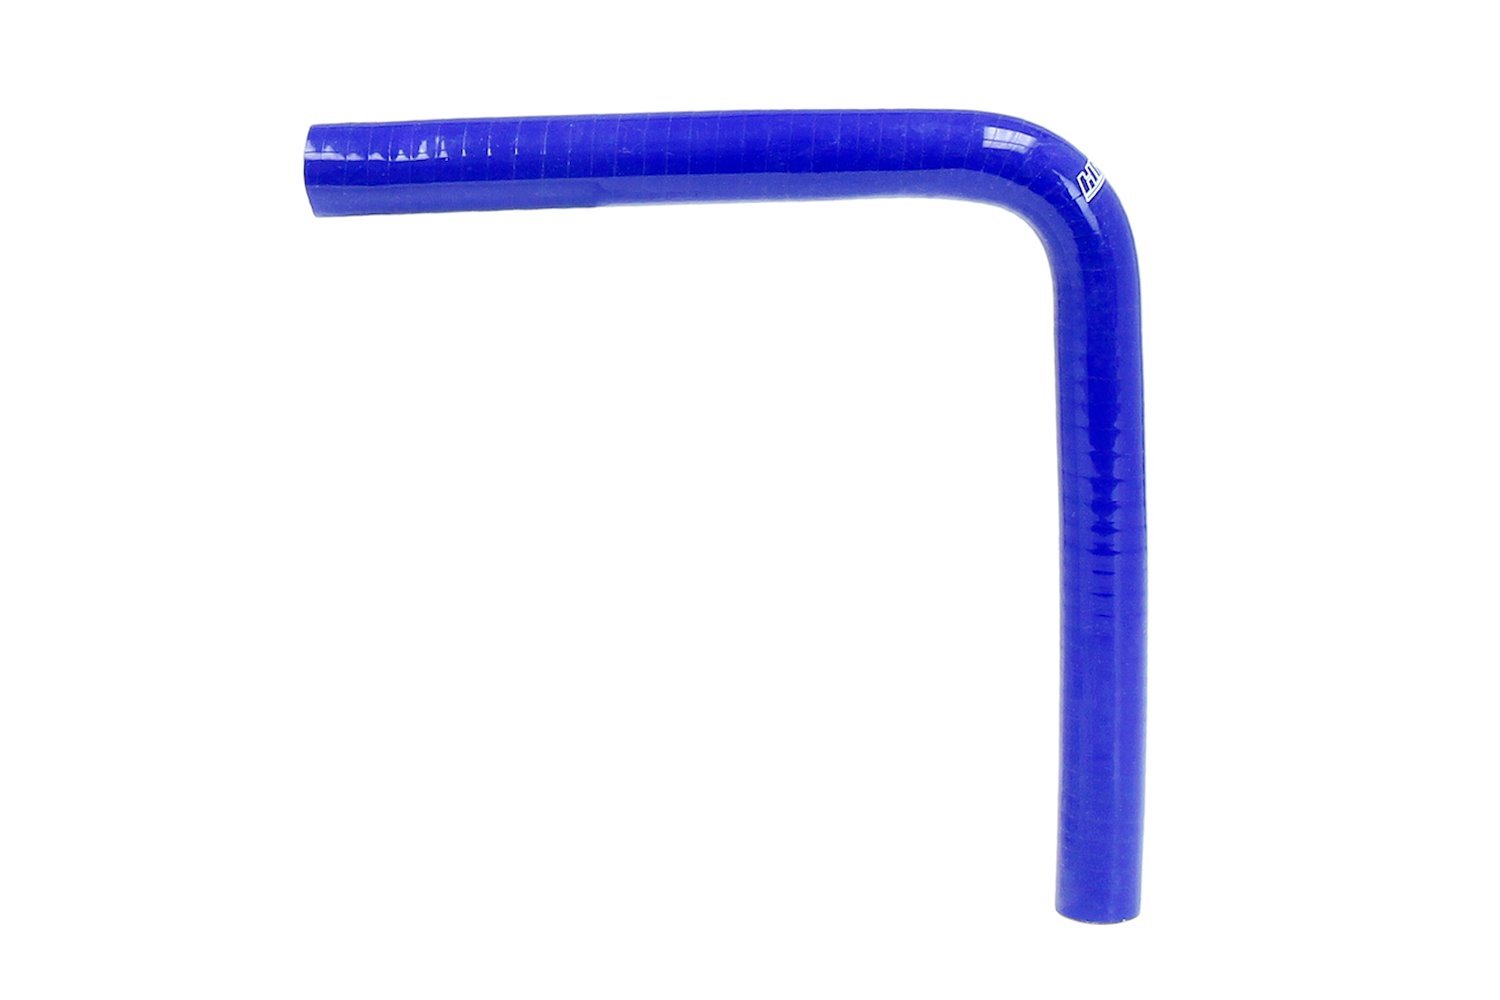 HTSEC90-112-BLUE Silicone 90-Degree Elbow Coupler Hose, High-Temp 4-Ply Reinforced, 1-1/8 in. ID, Blue